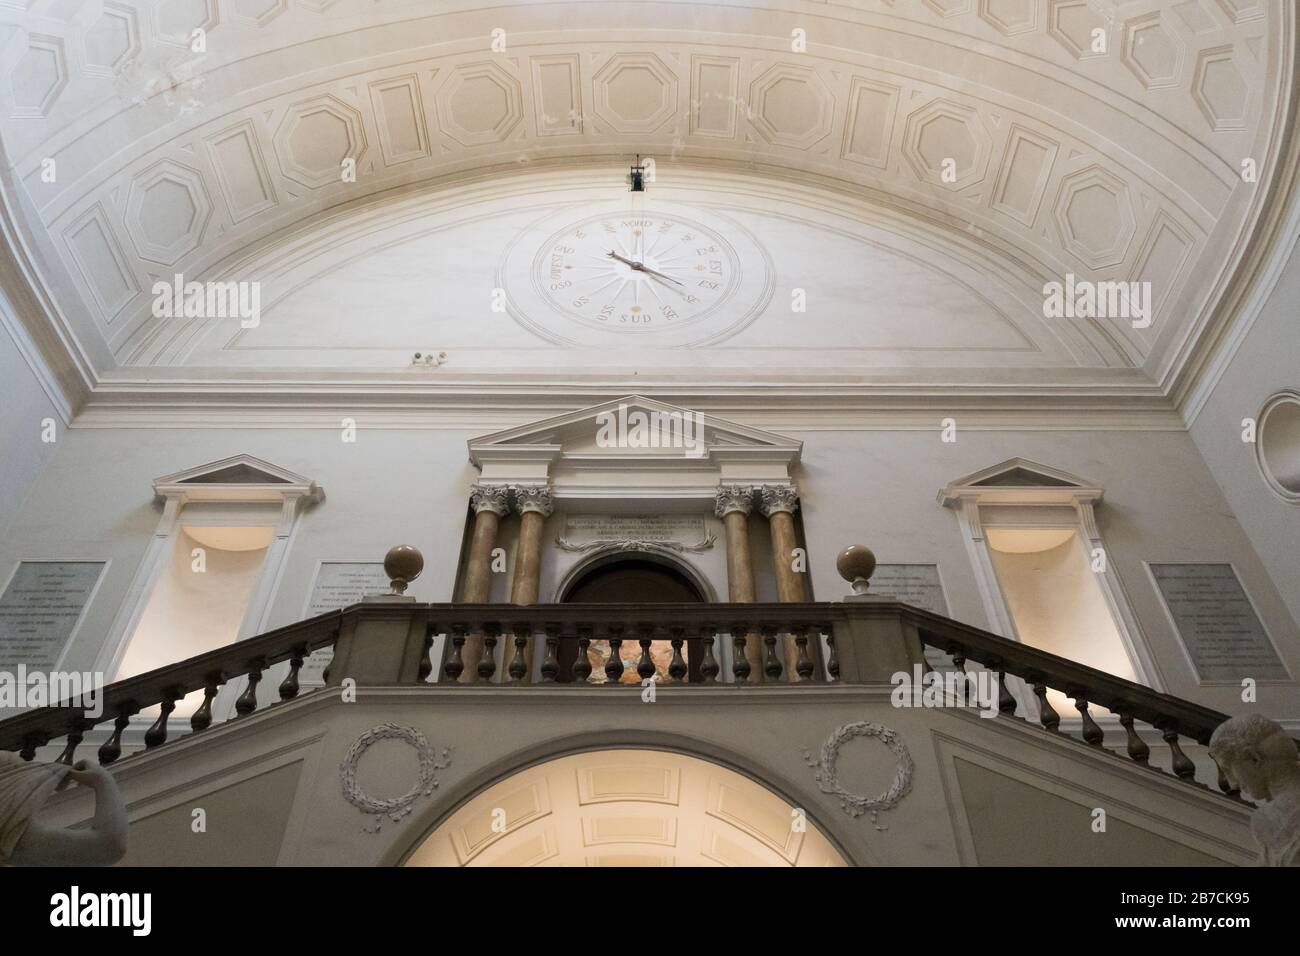 The grand staircase at the National Archeological Museum in Naples, Italy. Stock Photo